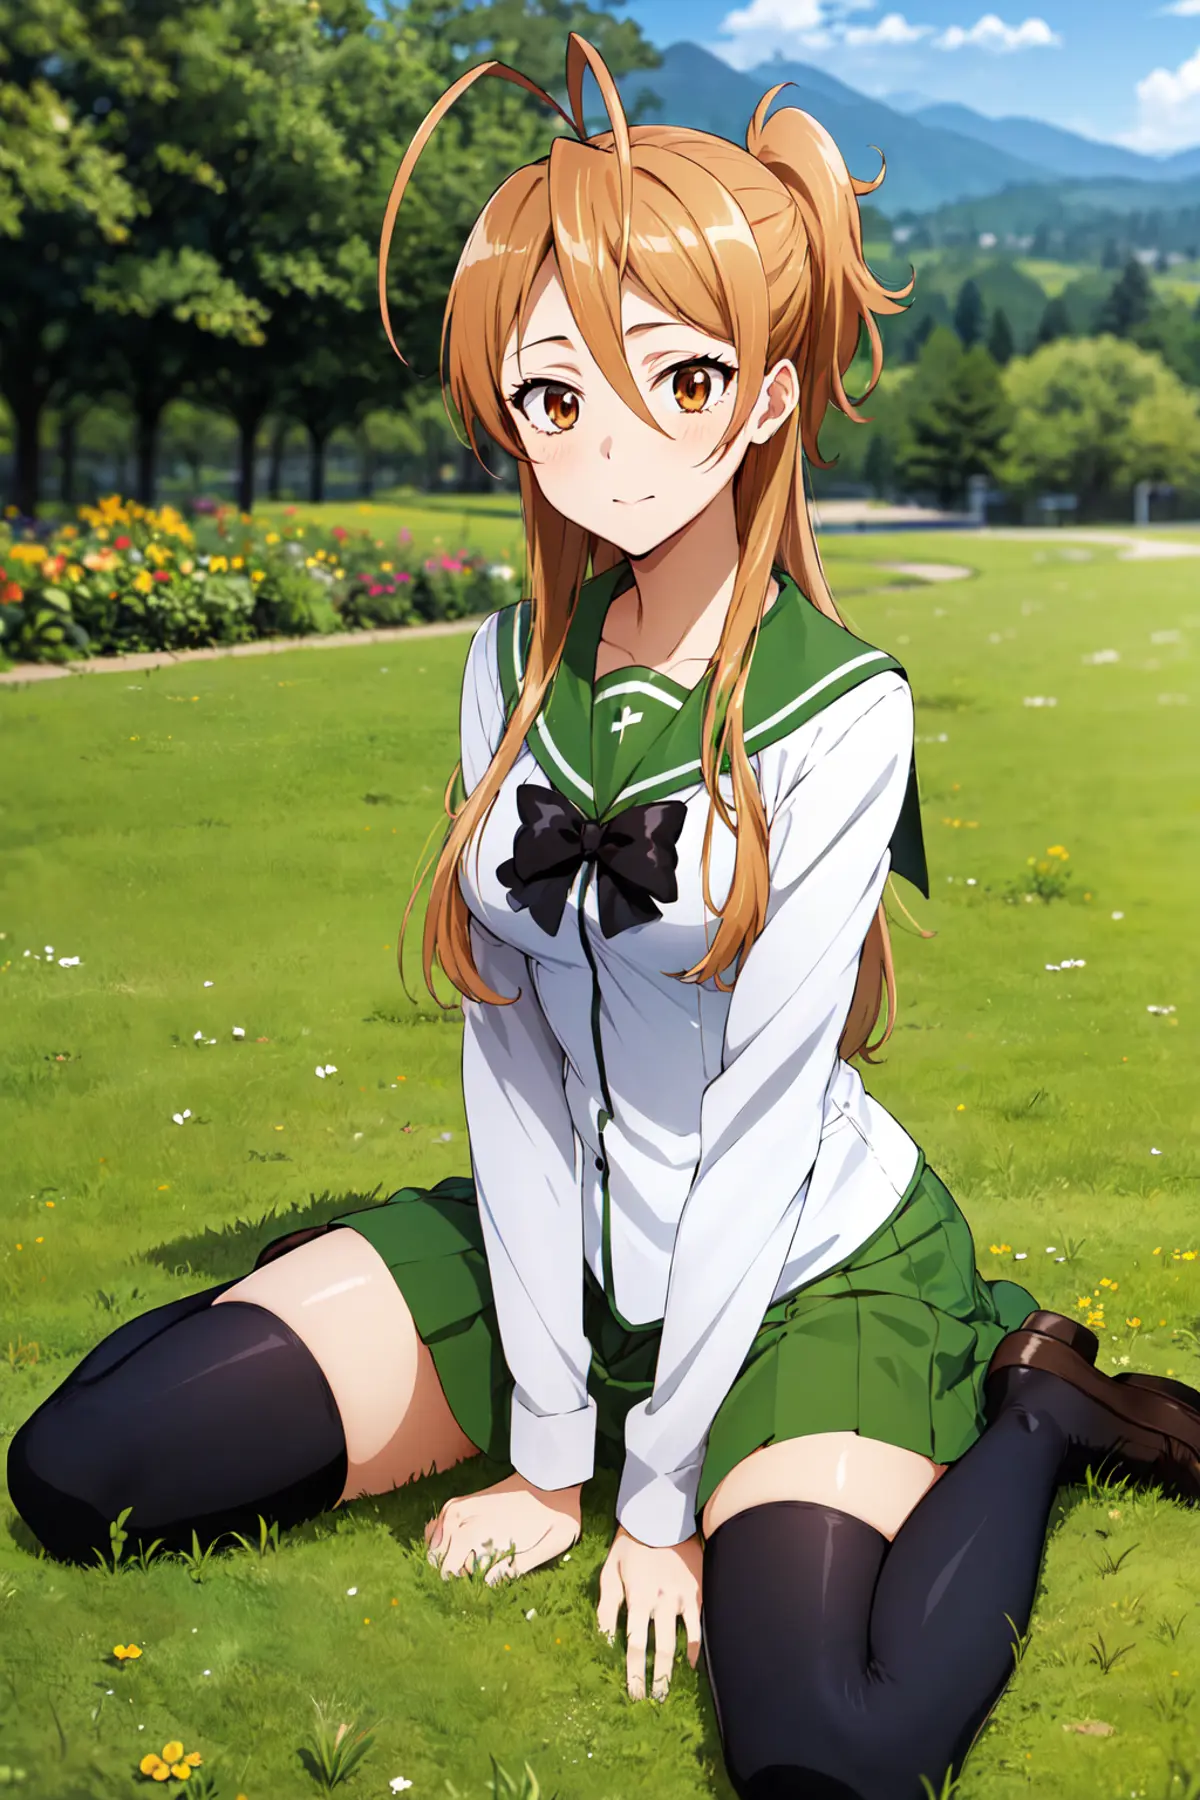 A young woman with light brown hair is seated on a grassy field. She is dressed in a green and white school uniform with a black bow and leggings. The backdrop of trees under a clear blue sky adds to the idyllic and peaceful atmosphere of the scene. 